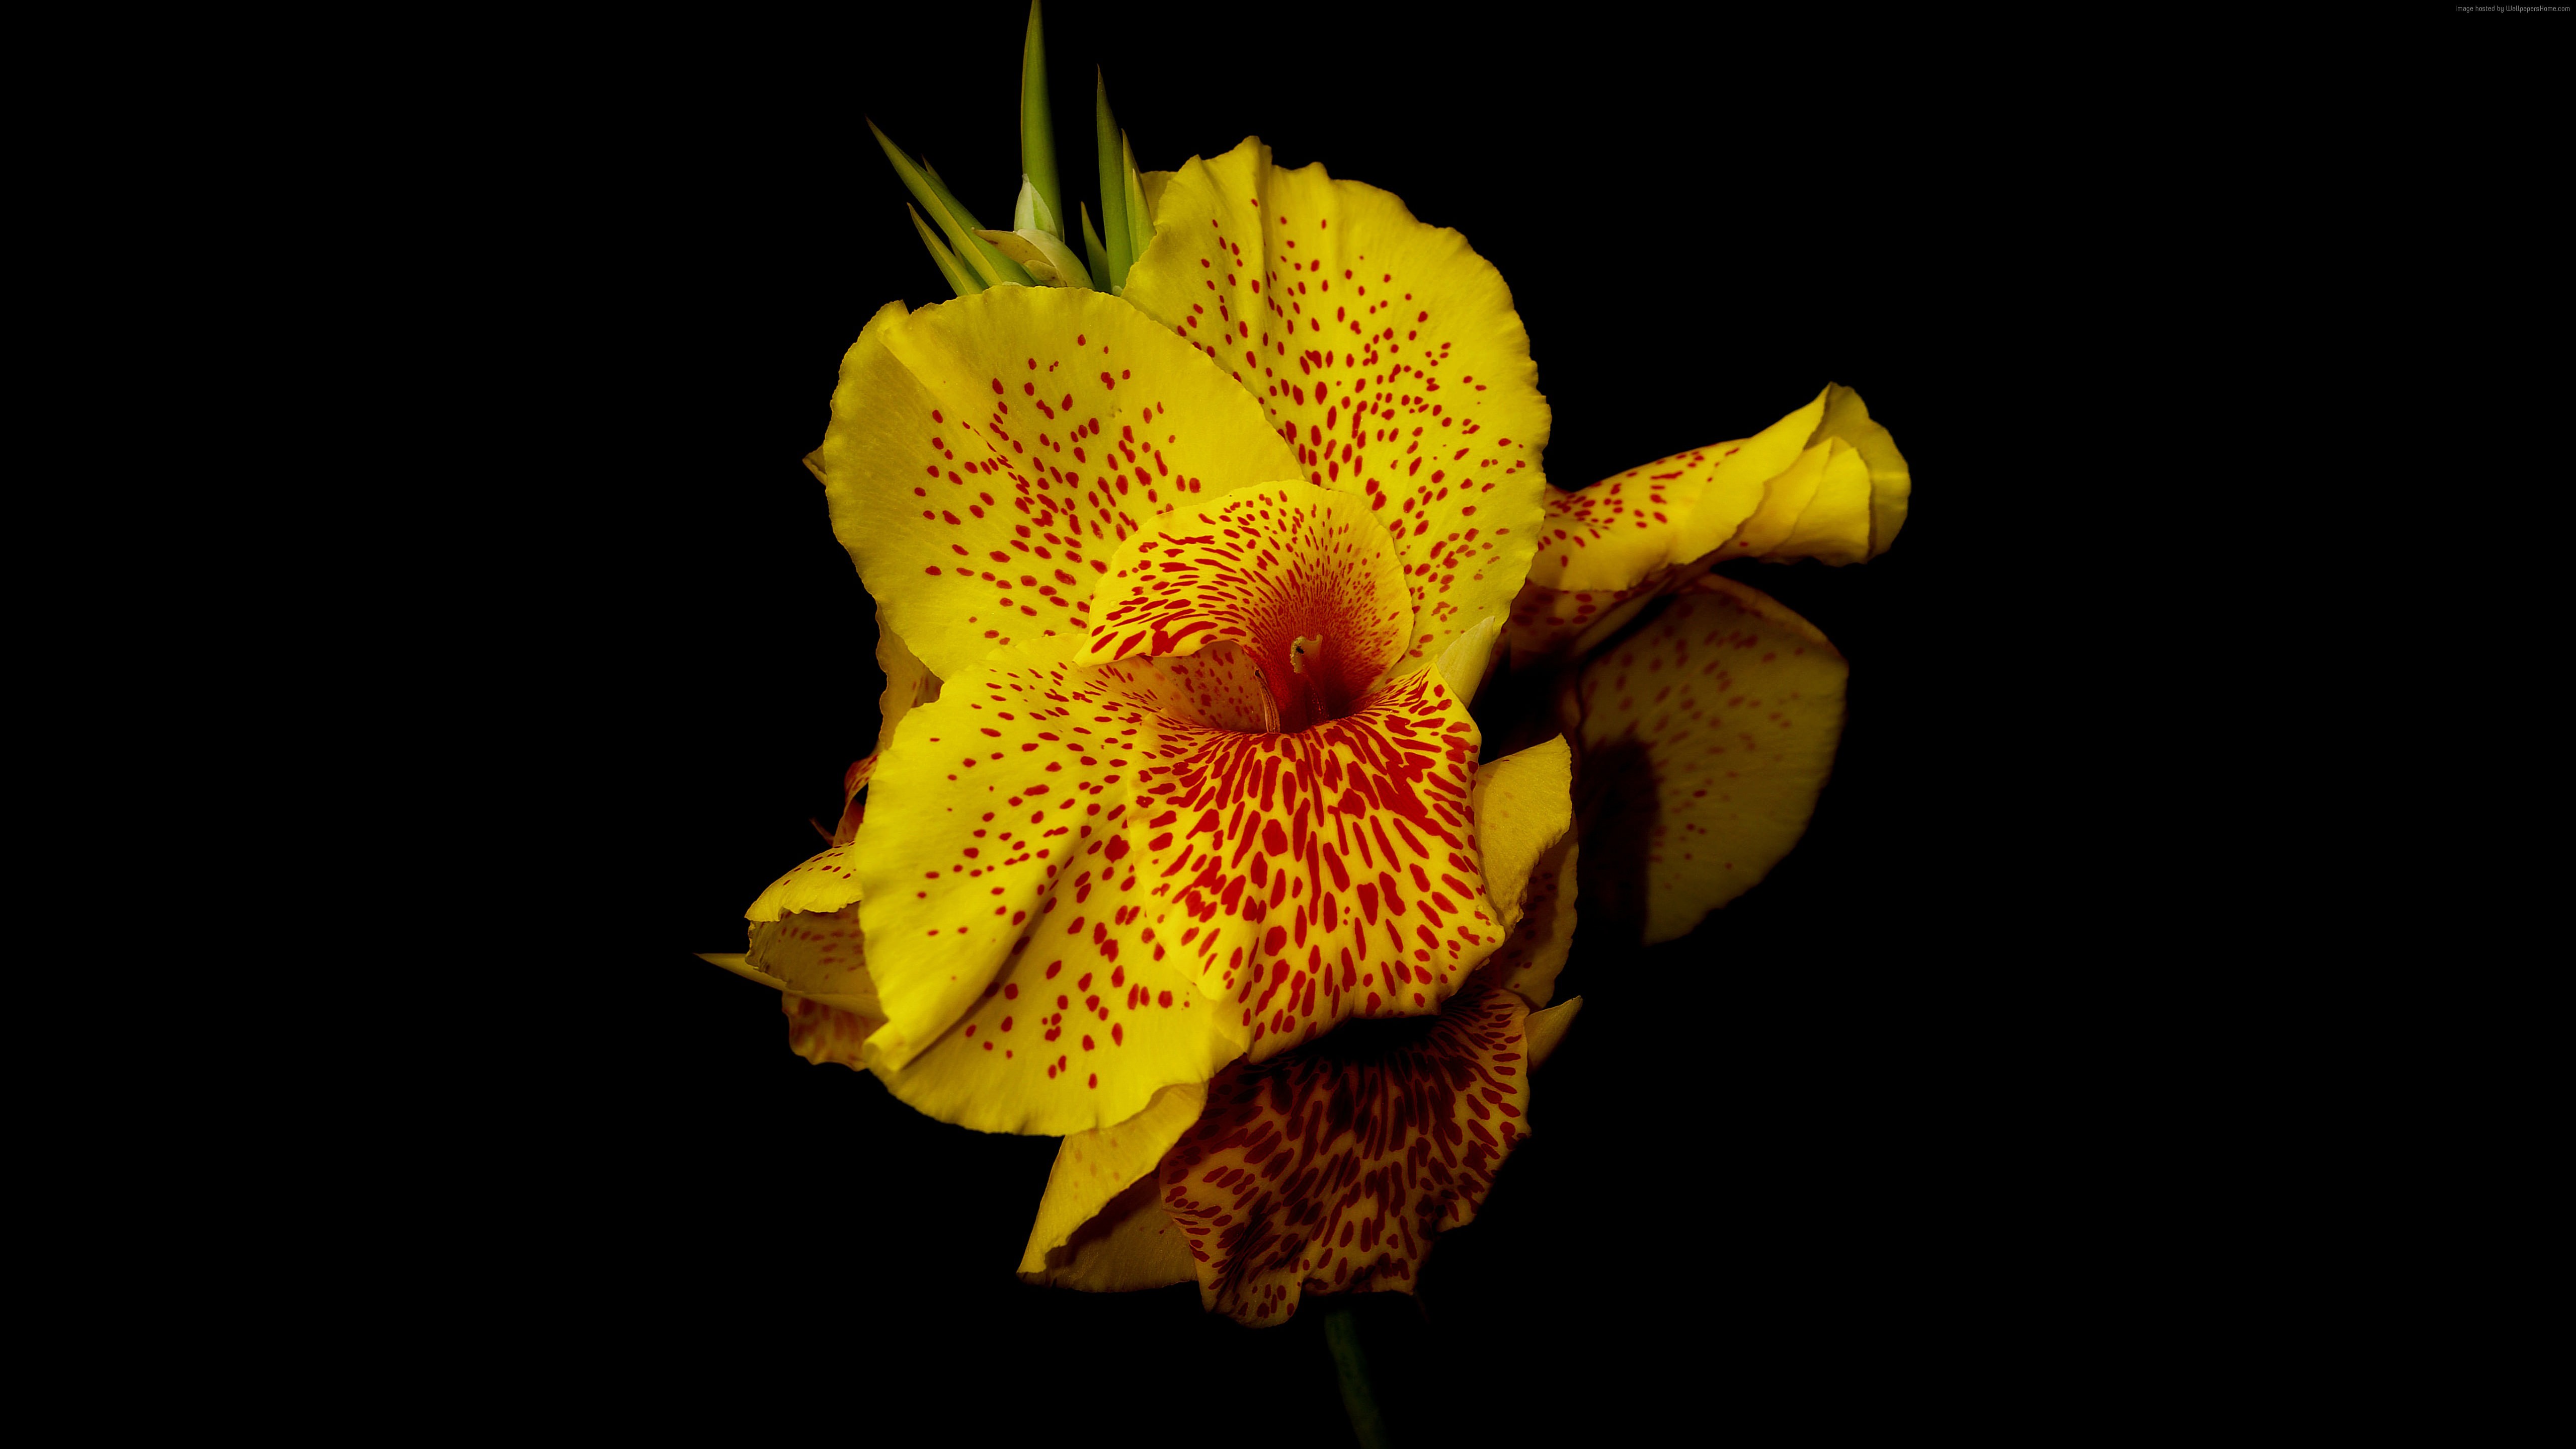 display wallpaper images,flower,yellow,petal,canna lily,flowering plant